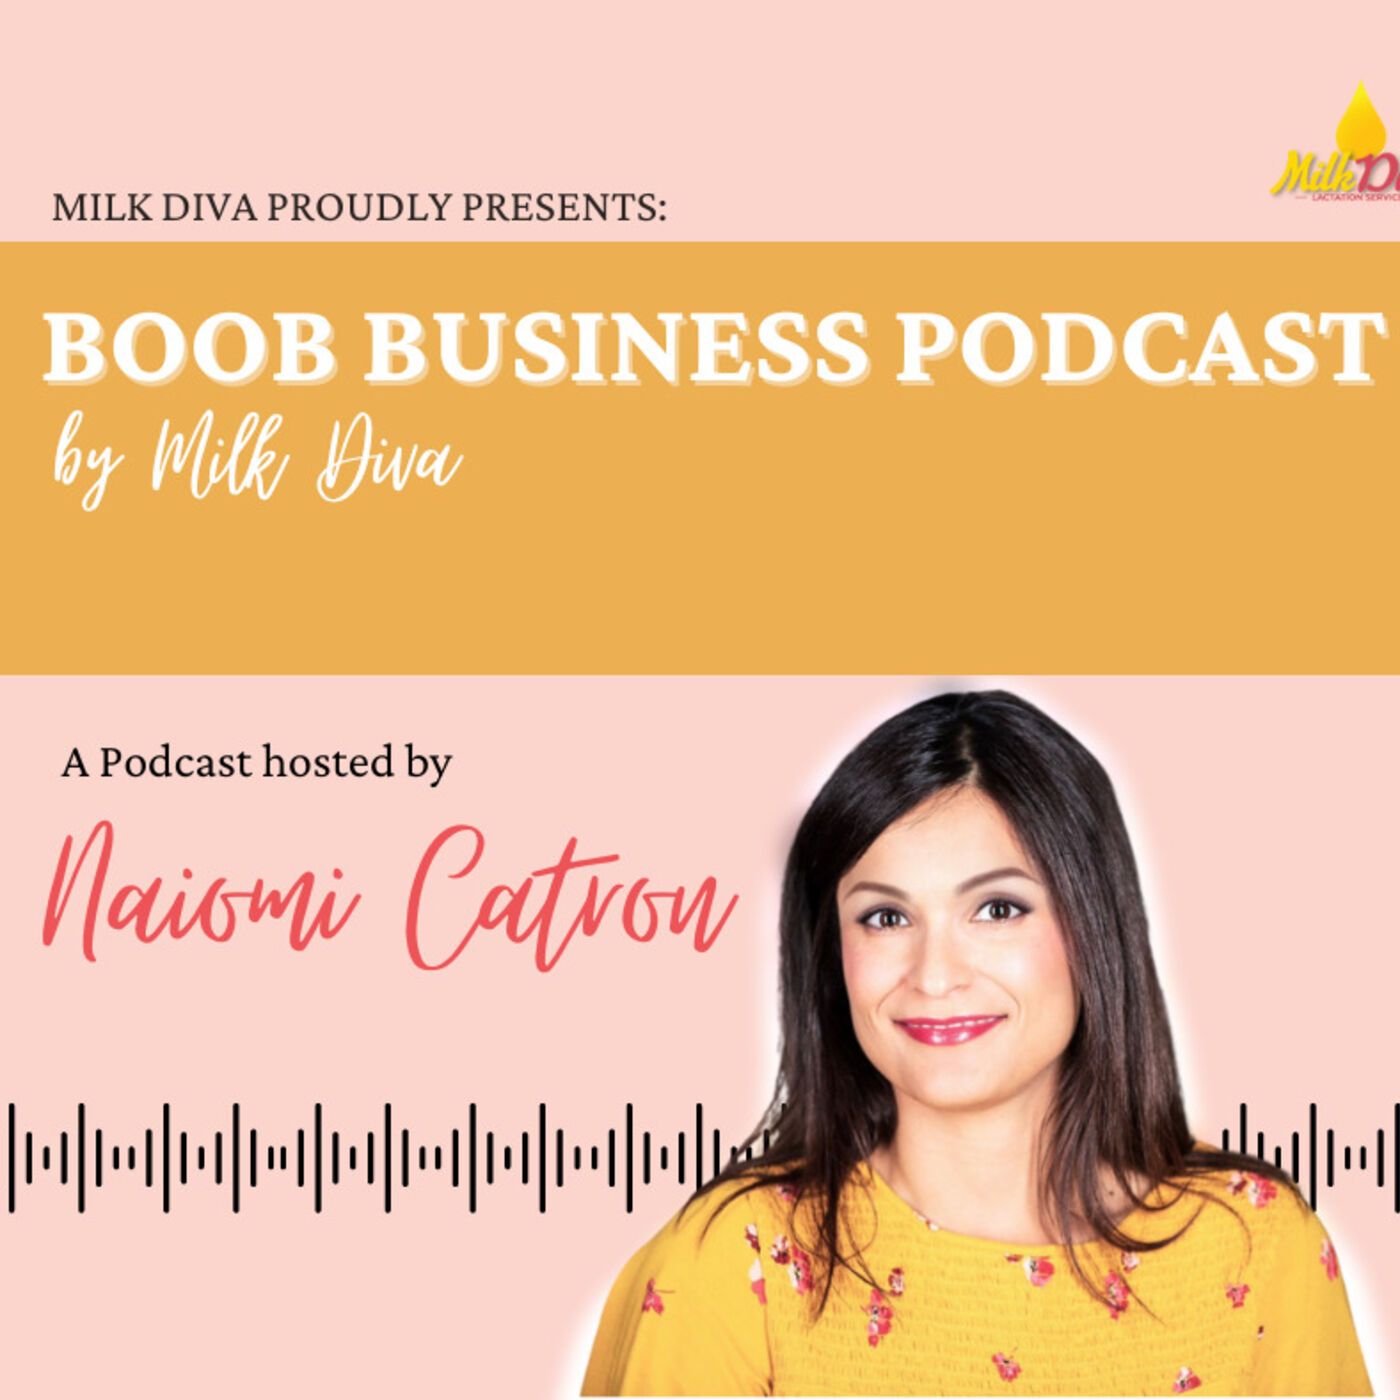 Navigating Breastfeeding with Allergies: Insights from The Boob Business Podcast Episode 29